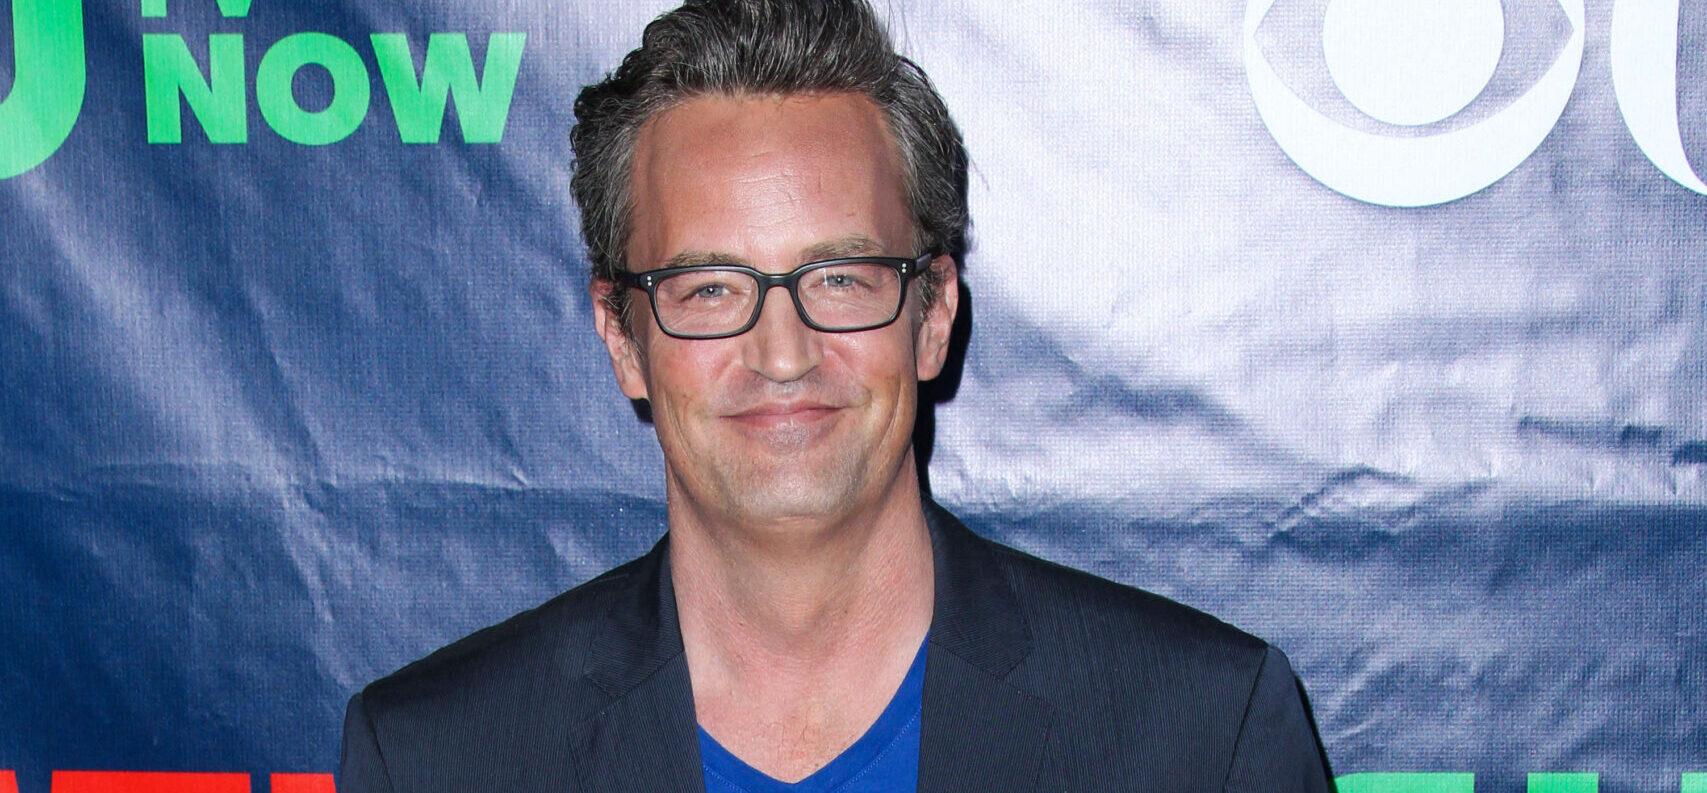 Matthew Perry’s Manner Of Death Ruled An ‘Accident’ 2 Months After His Death